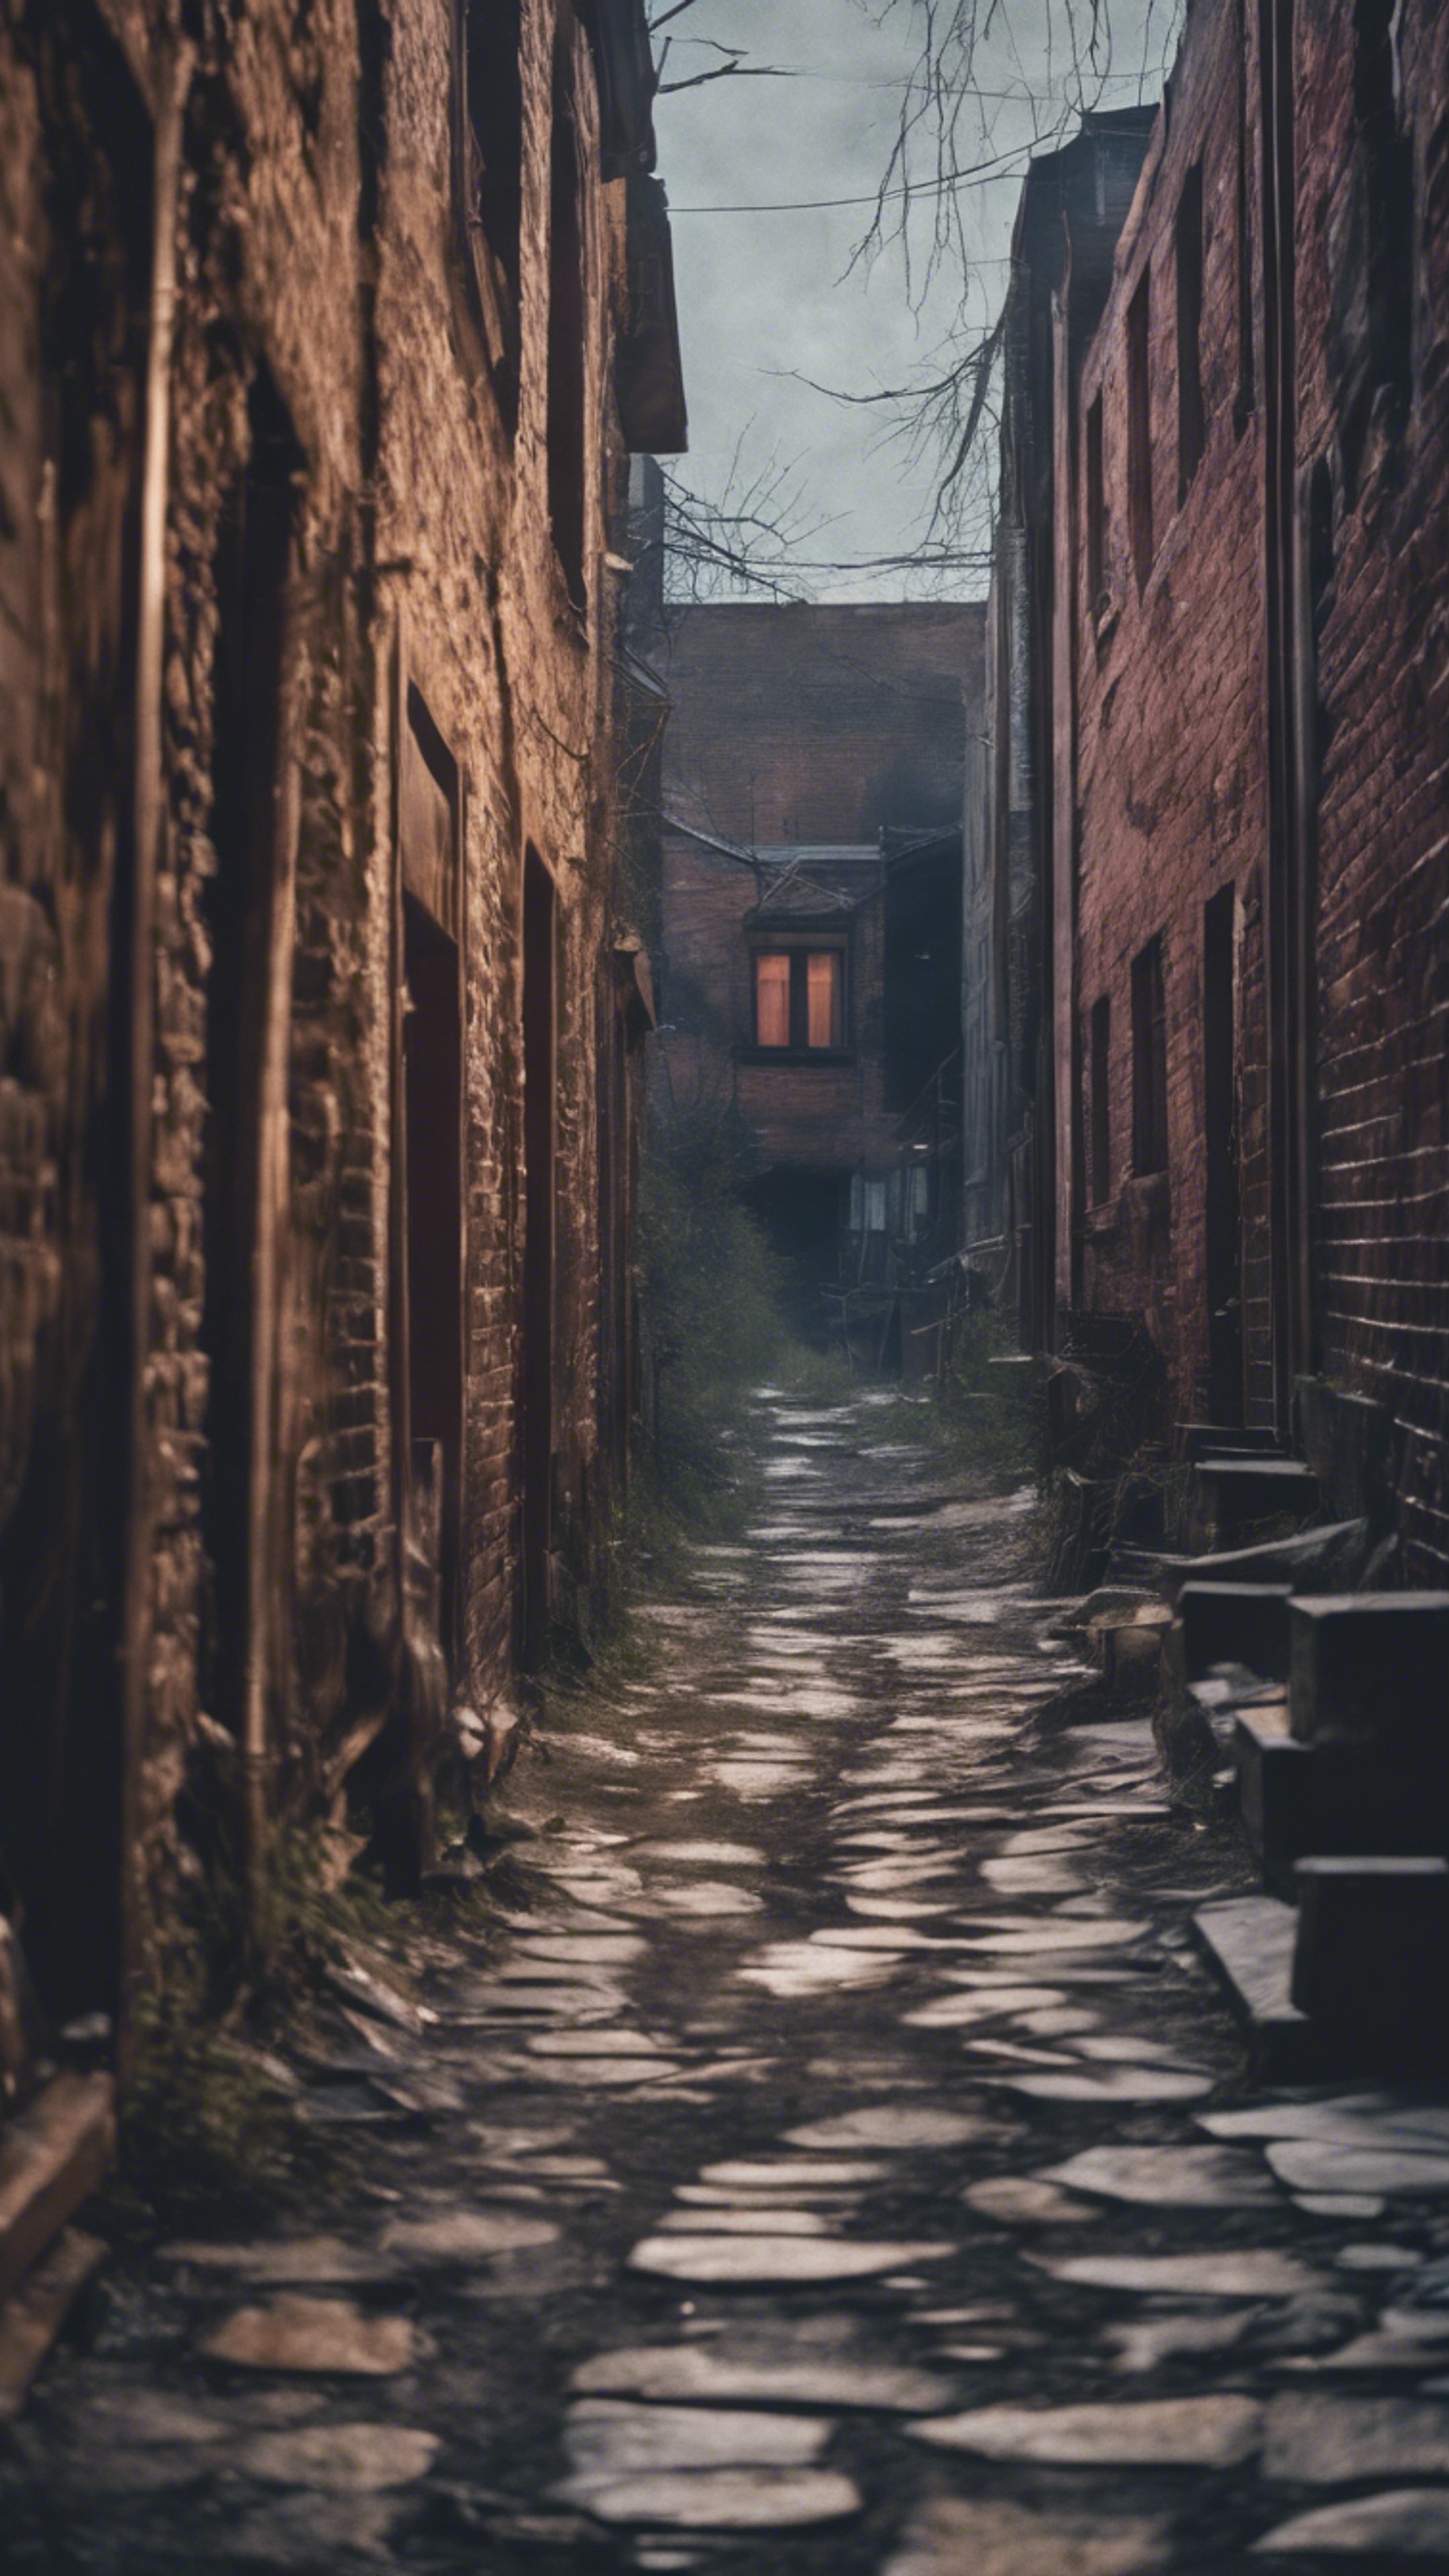 A haunted alleyway in a ghost town with spectral figures floating around. Tapet[5b53dba013a8448c806a]